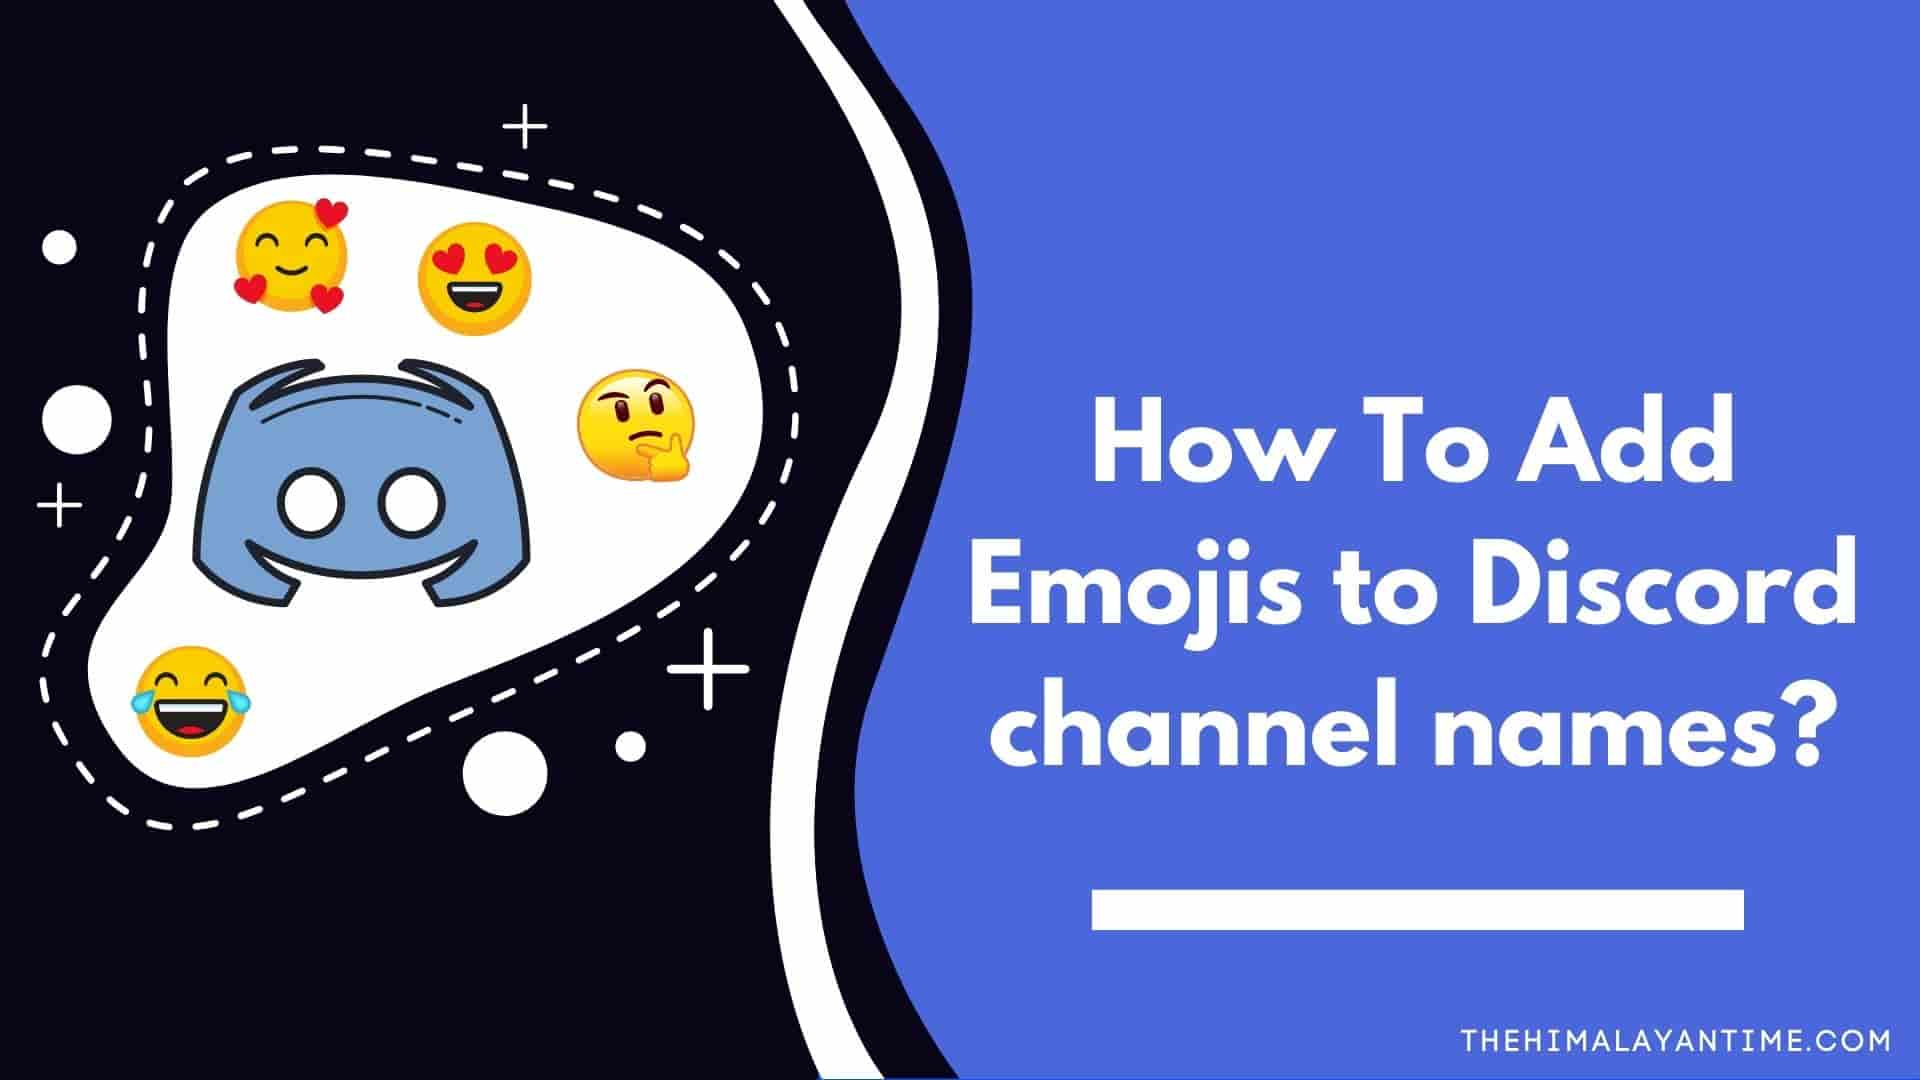 How To Add Emojis to Discord channel names?